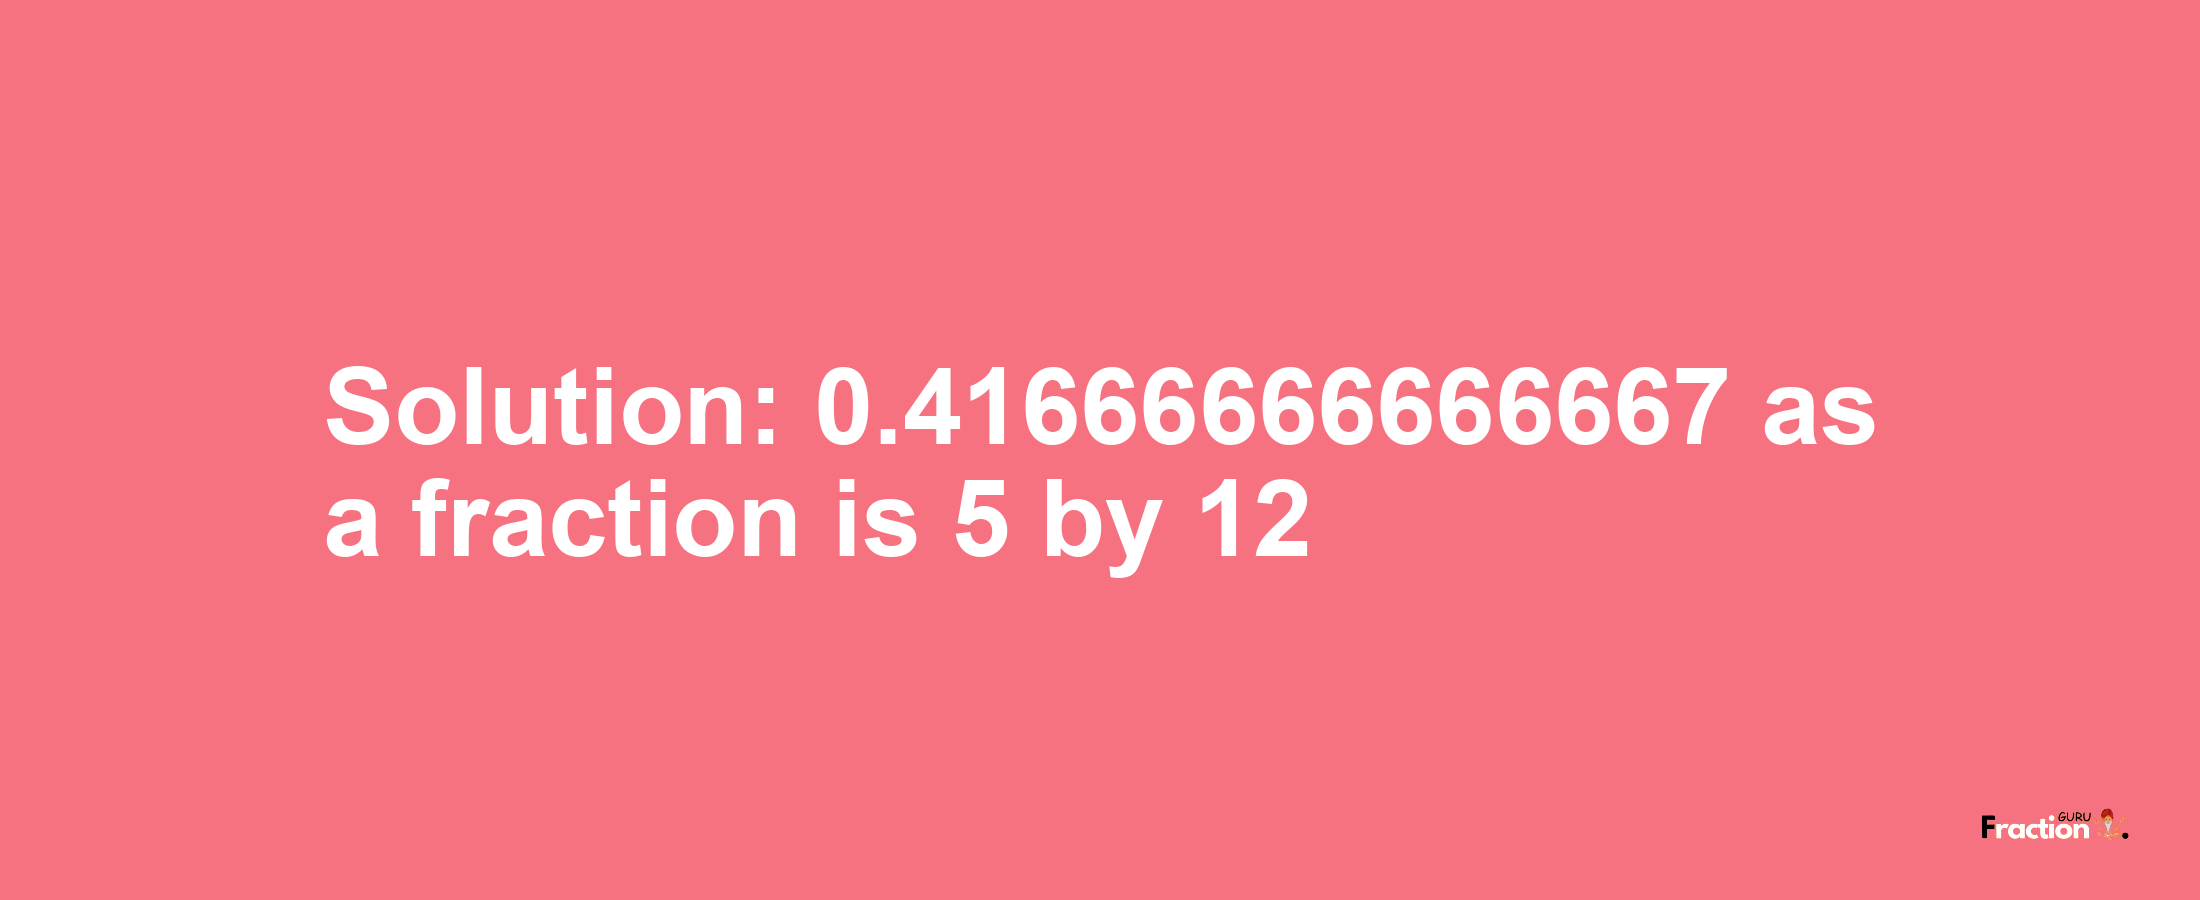 Solution:0.41666666666667 as a fraction is 5/12